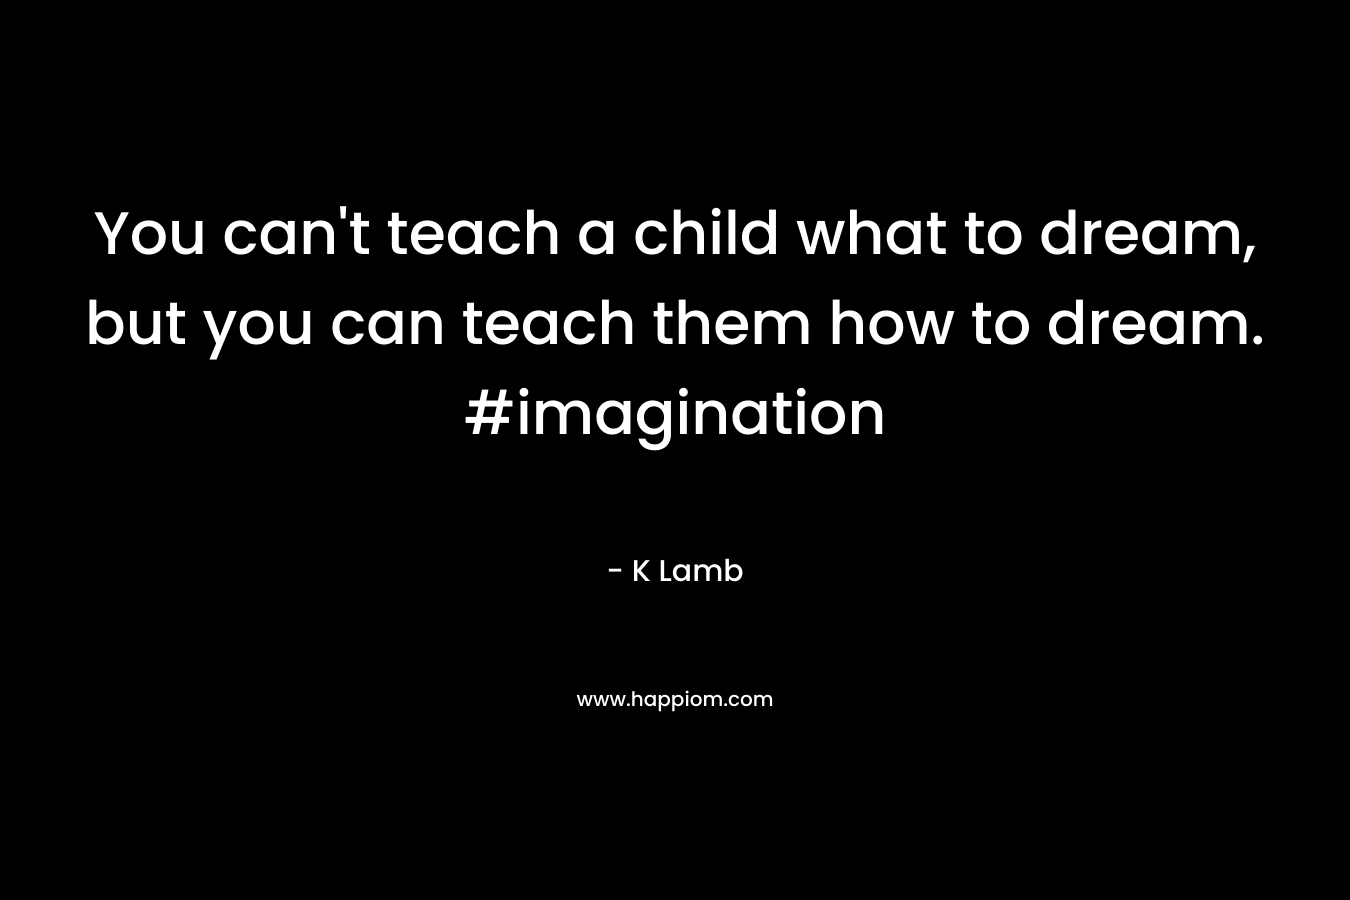 You can't teach a child what to dream, but you can teach them how to dream. #imagination